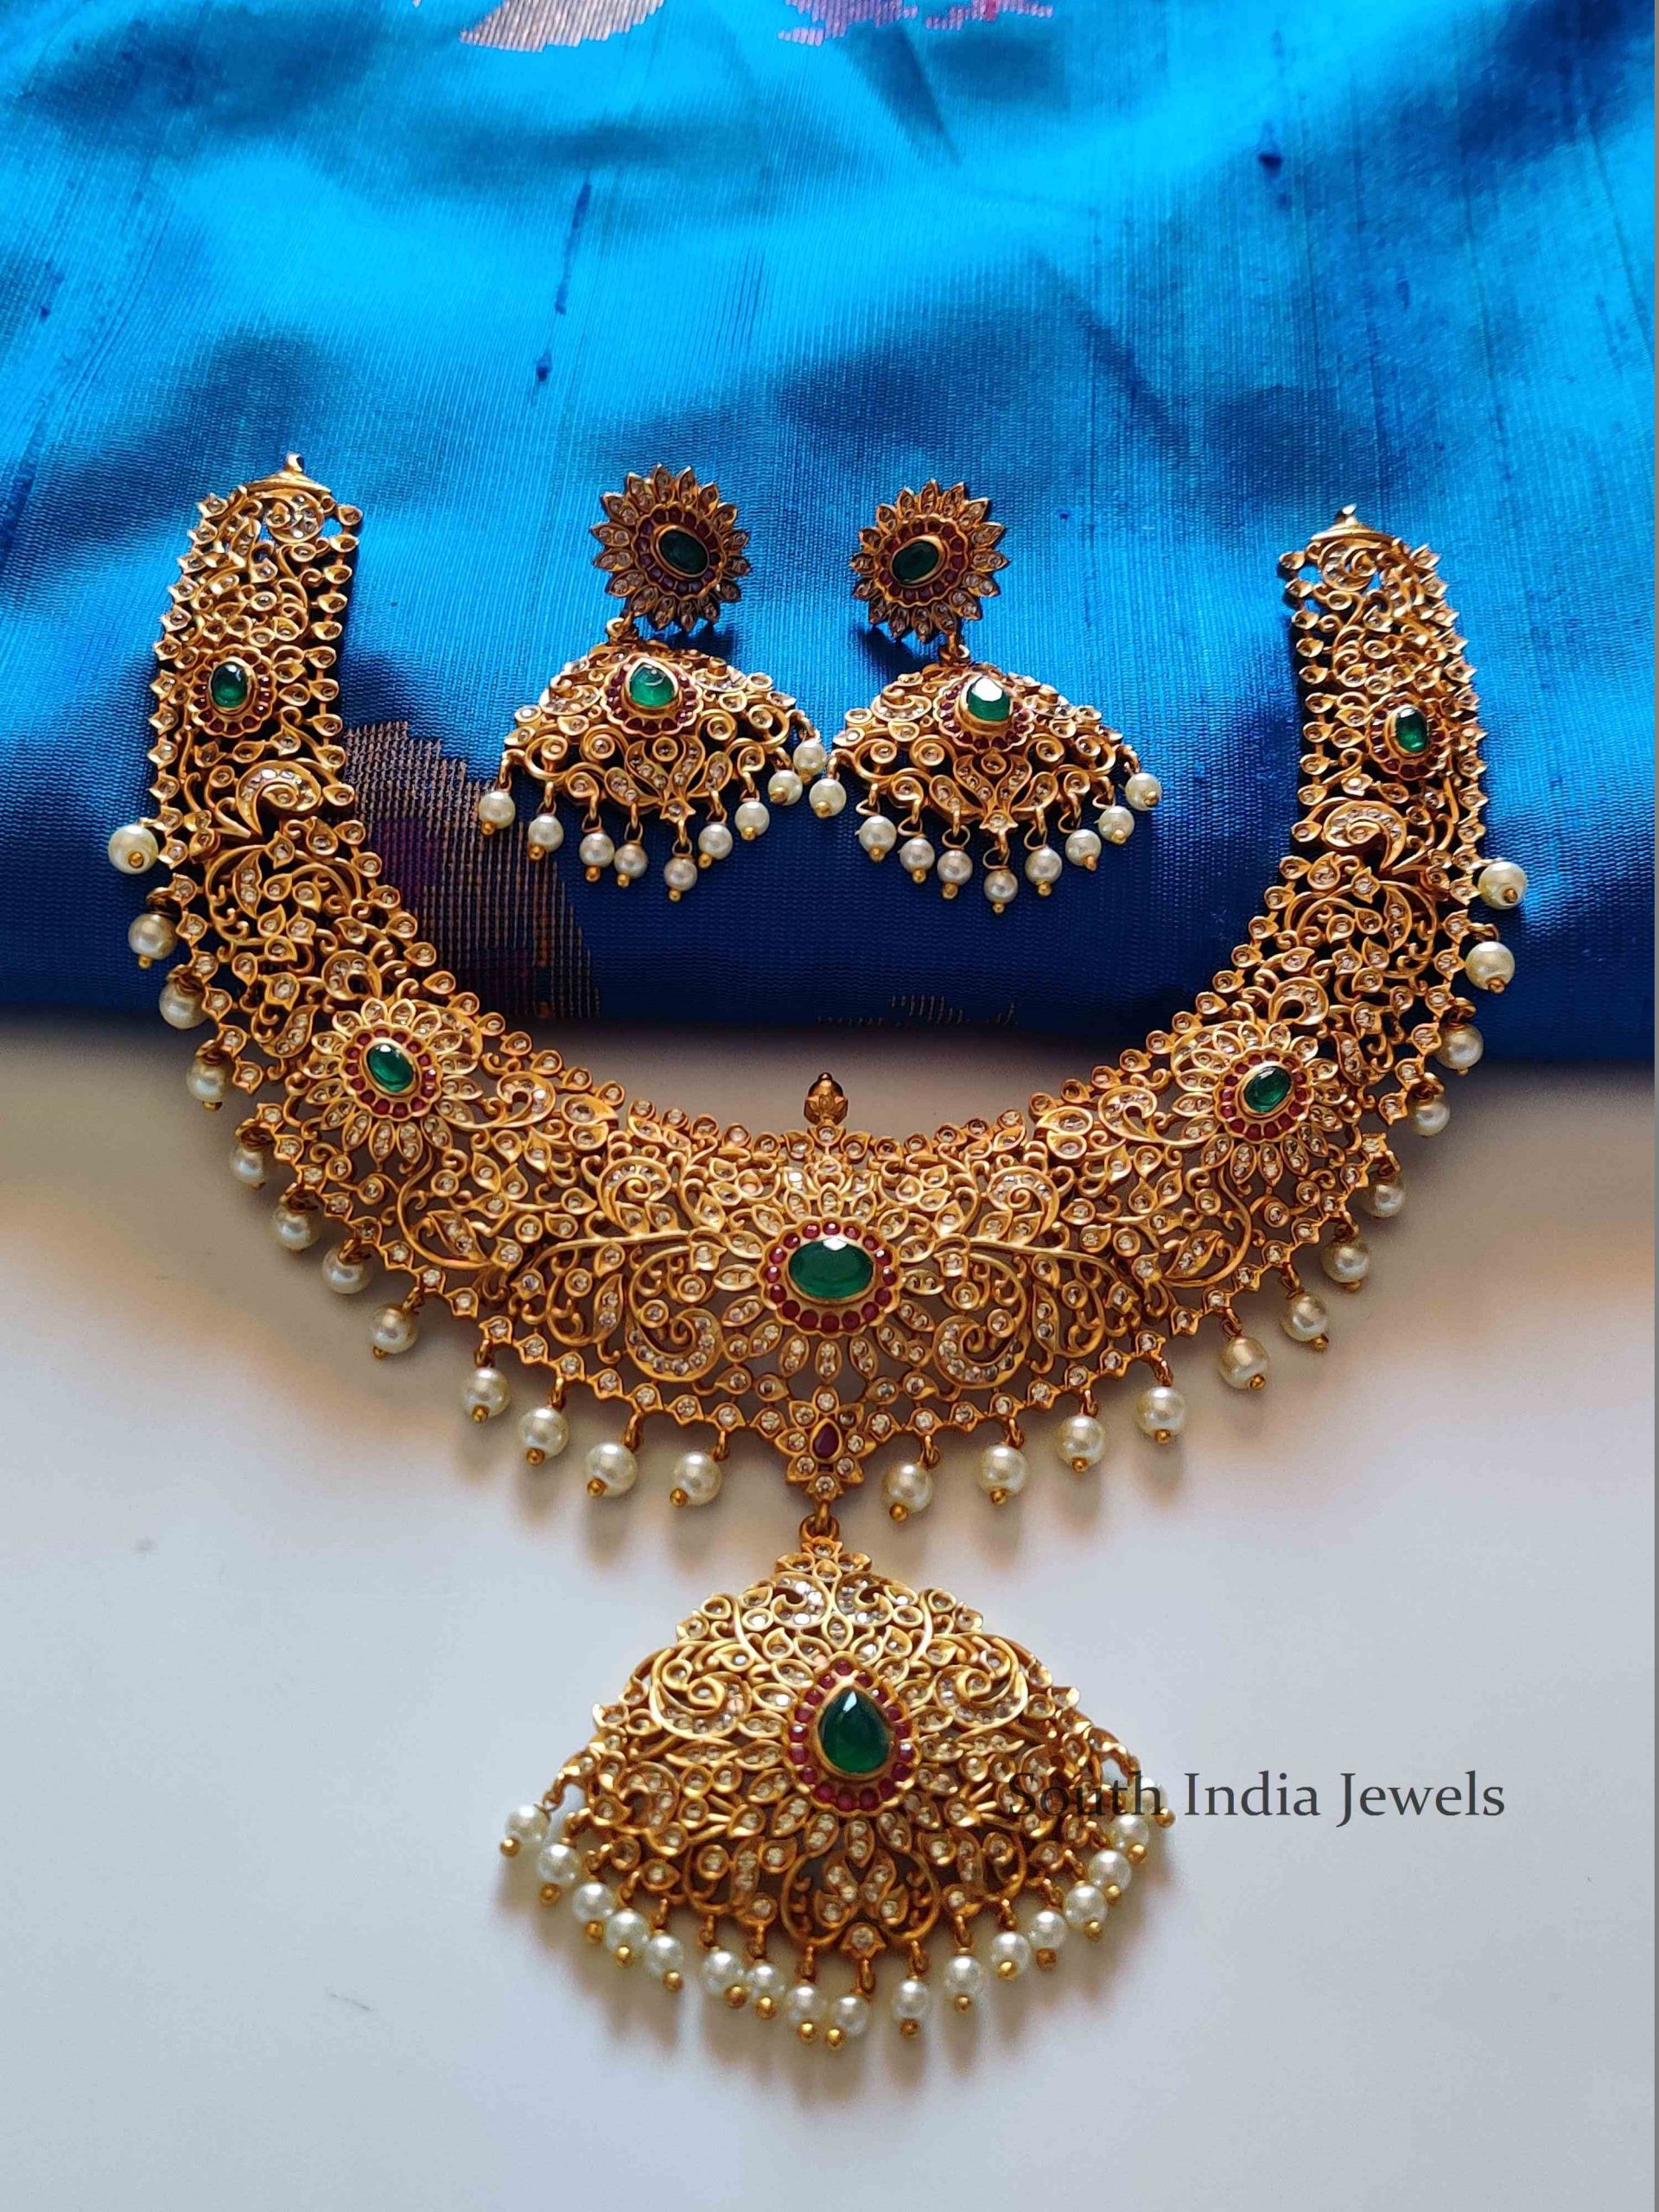 Grand Bridal Necklace and Earrings